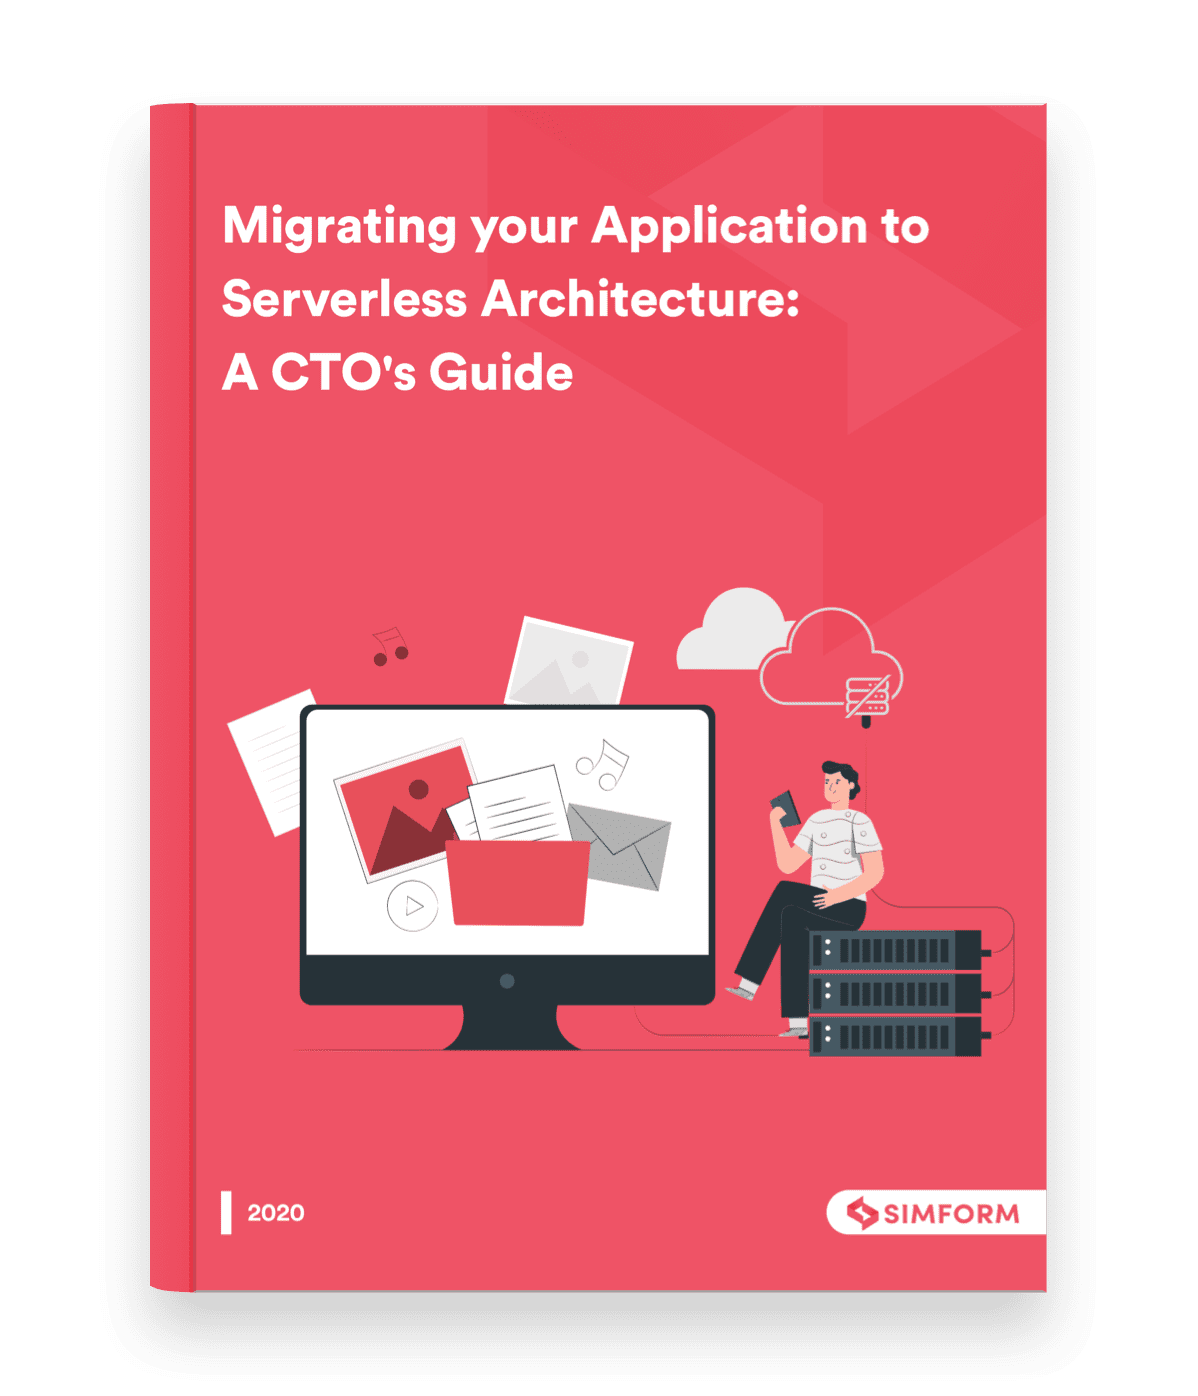 Migrating your App to Serverless Architecture